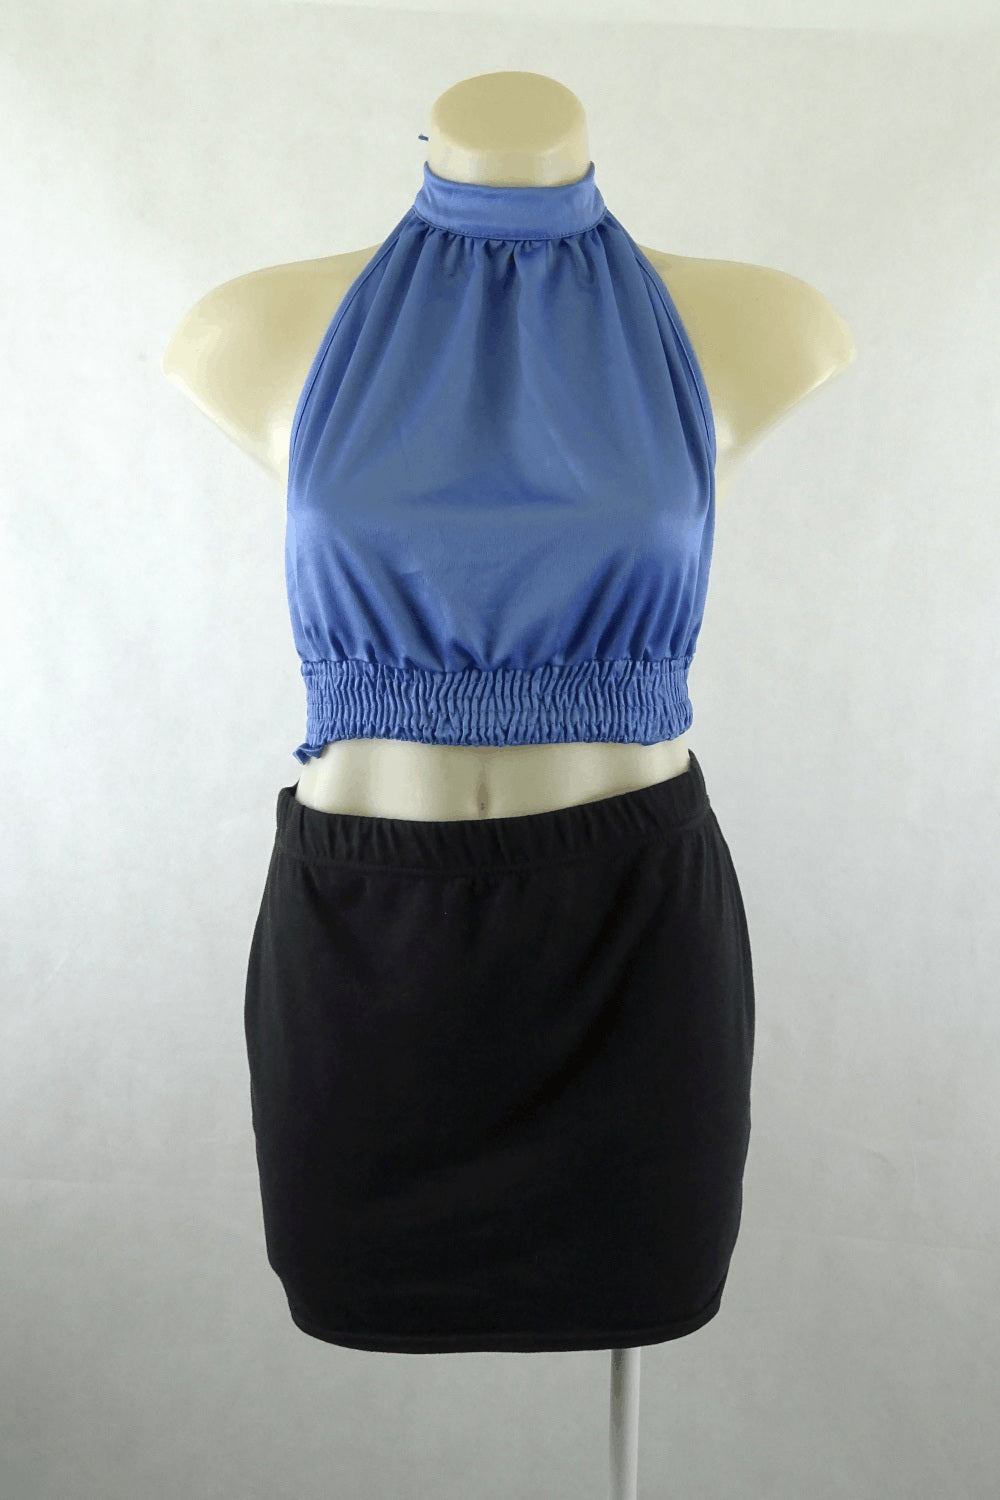 Melville Blue Halter Top One Size